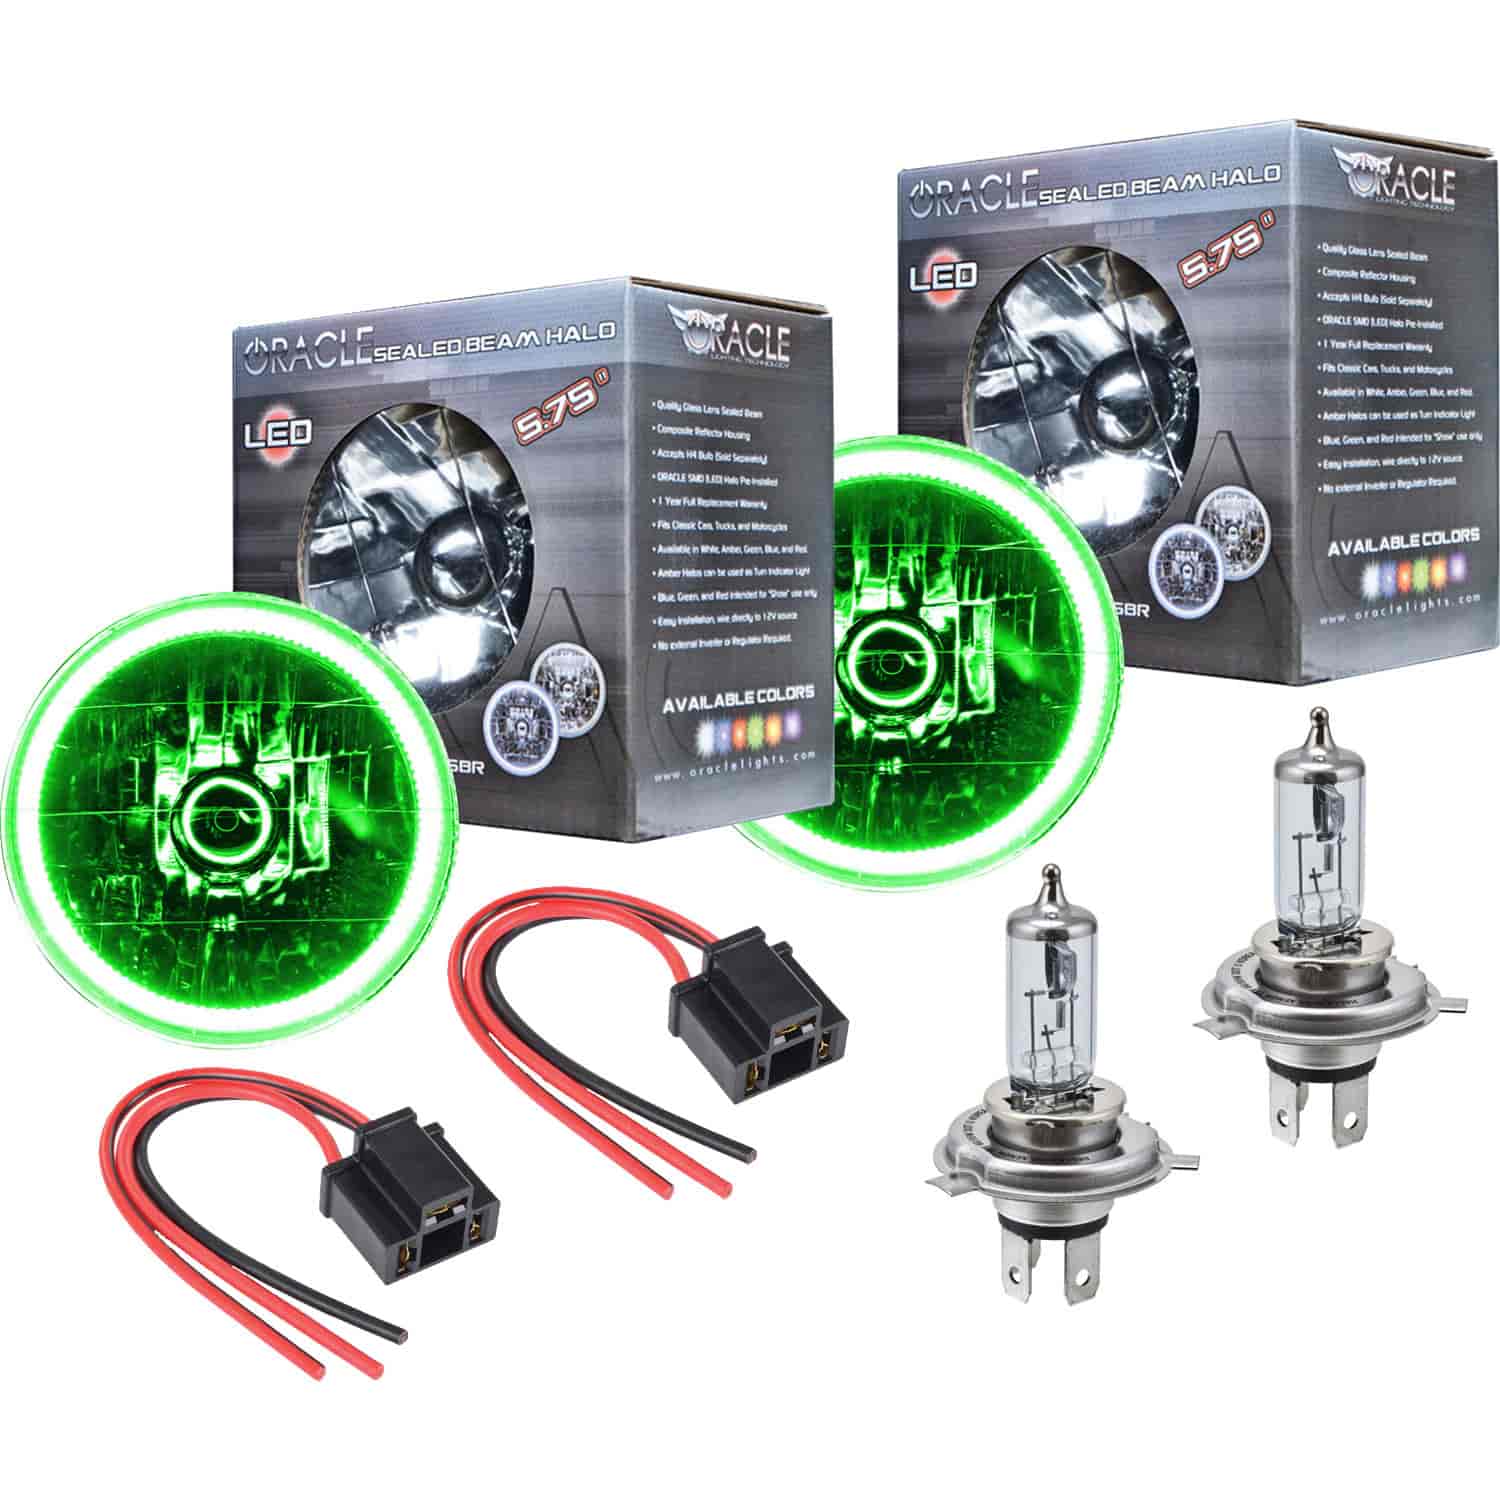 5.75" H4 Headlight Conversion Kit Green LED Halo Includes